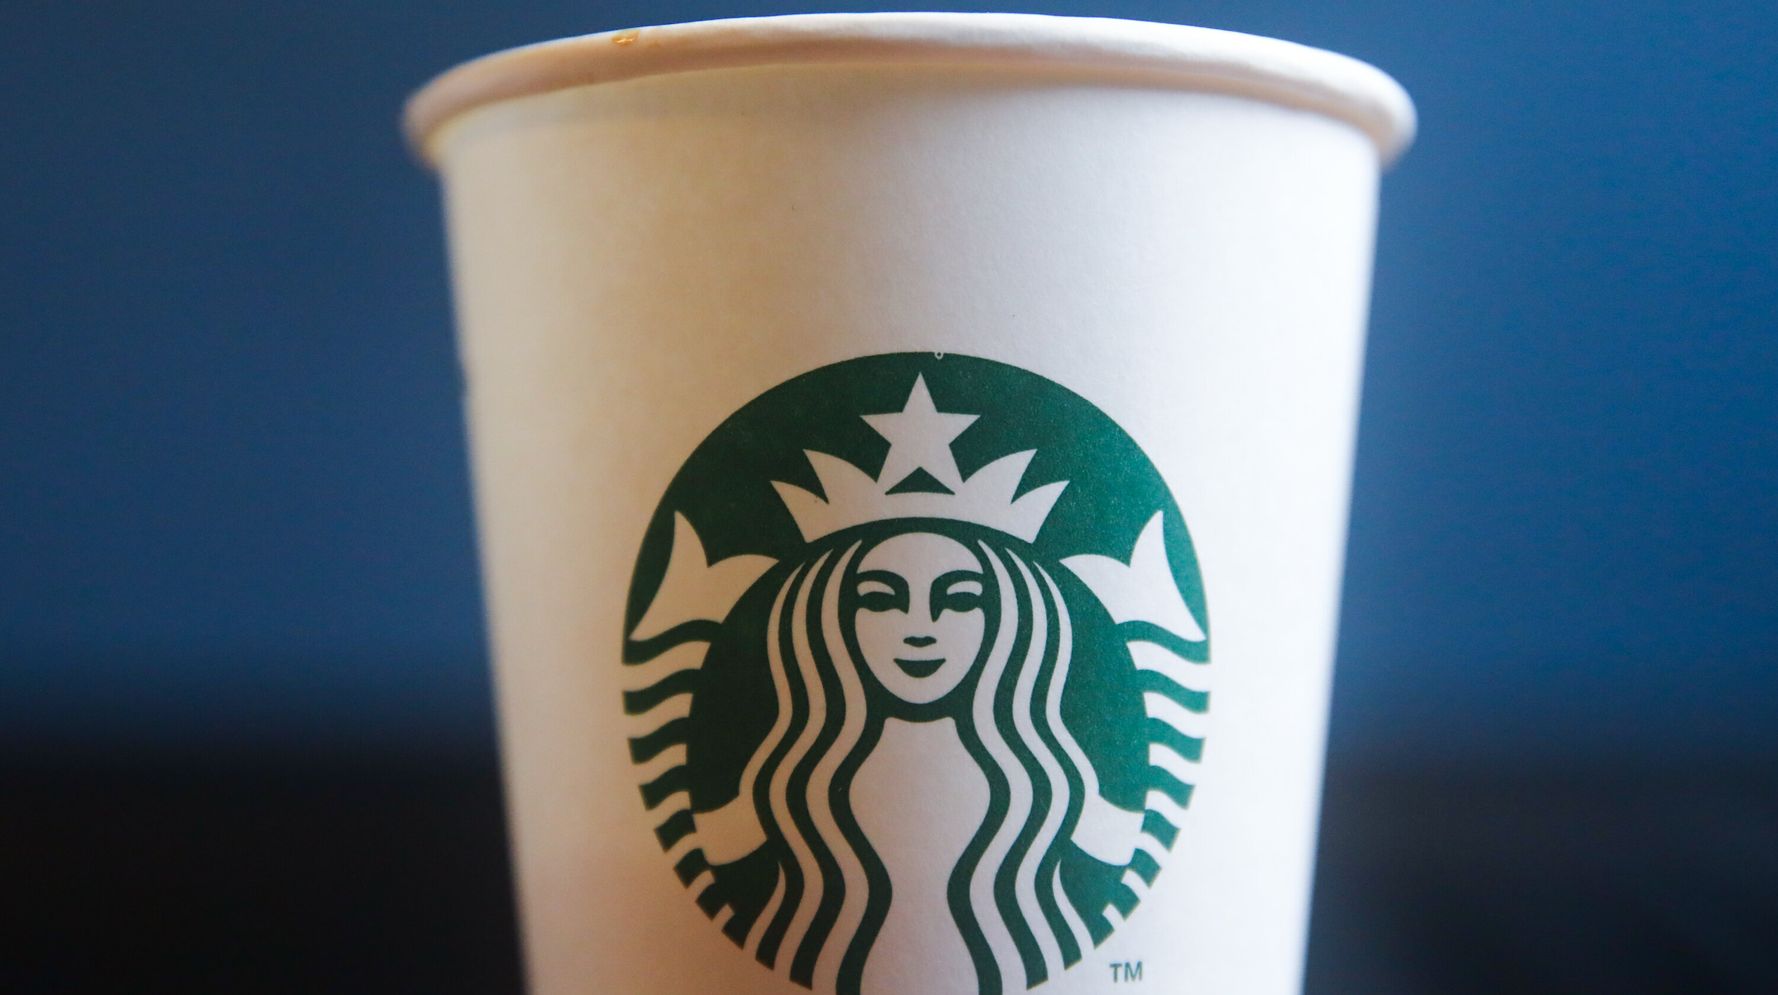 Starbucks Broke Law By Firing And Threatening Pro-Union Workers, Labor Board Alleges